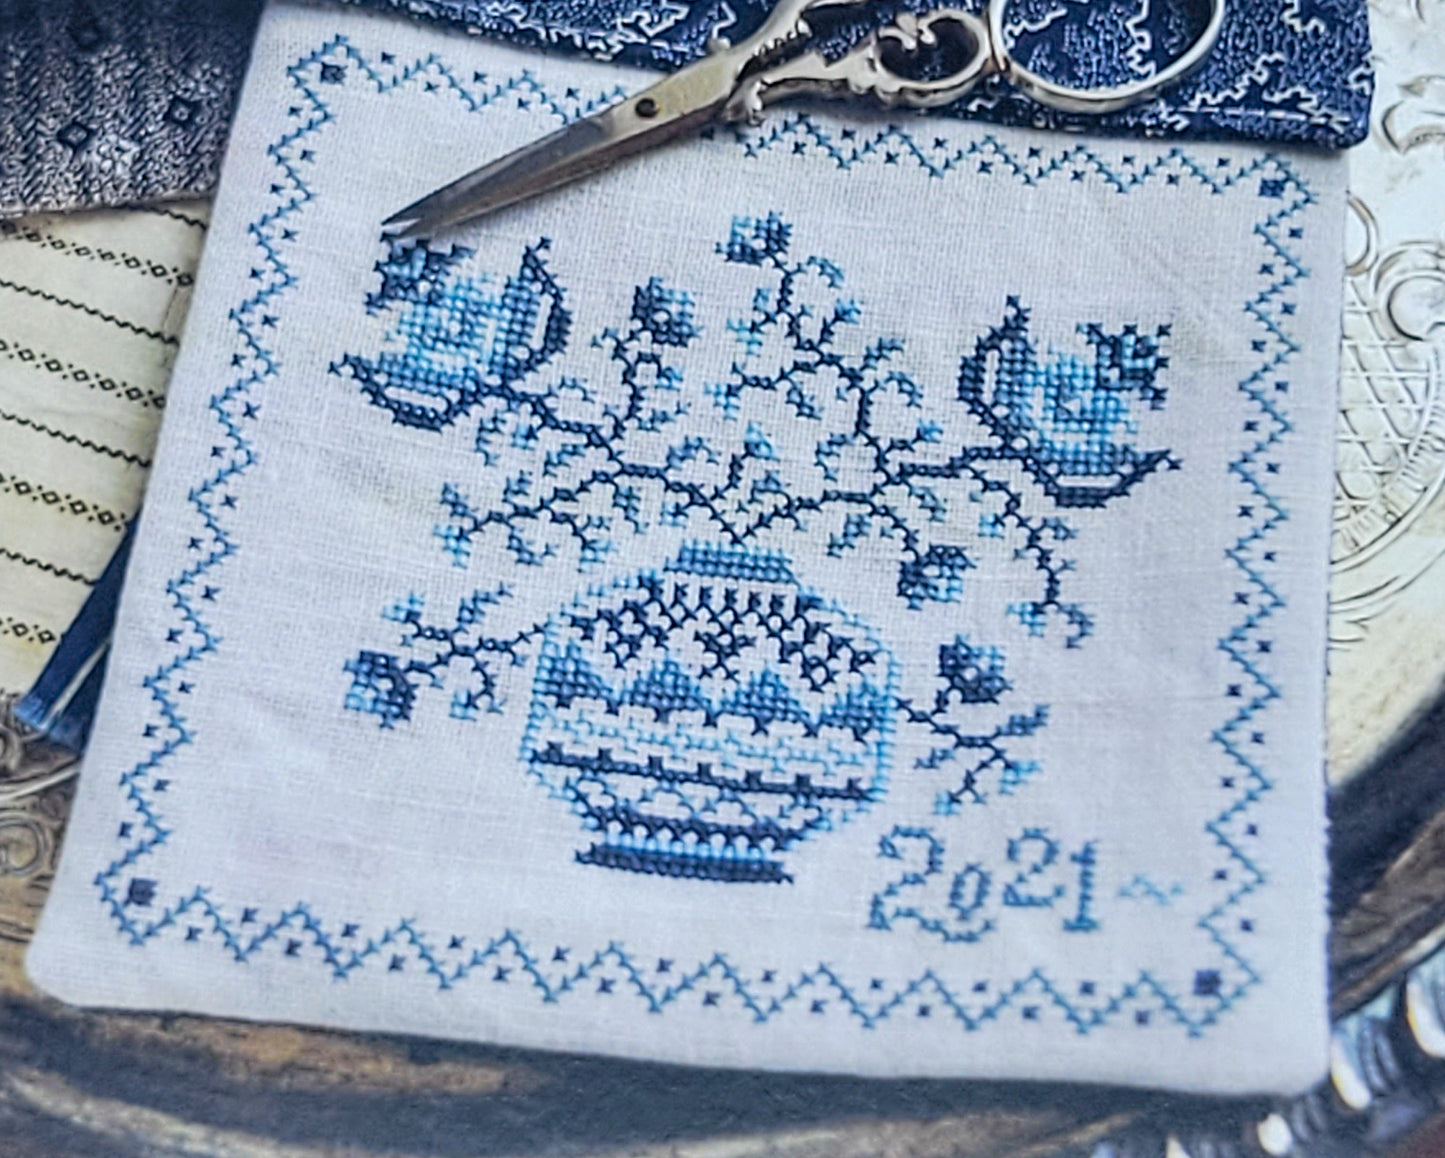 Delft Blues by Summer House Stitche Workes